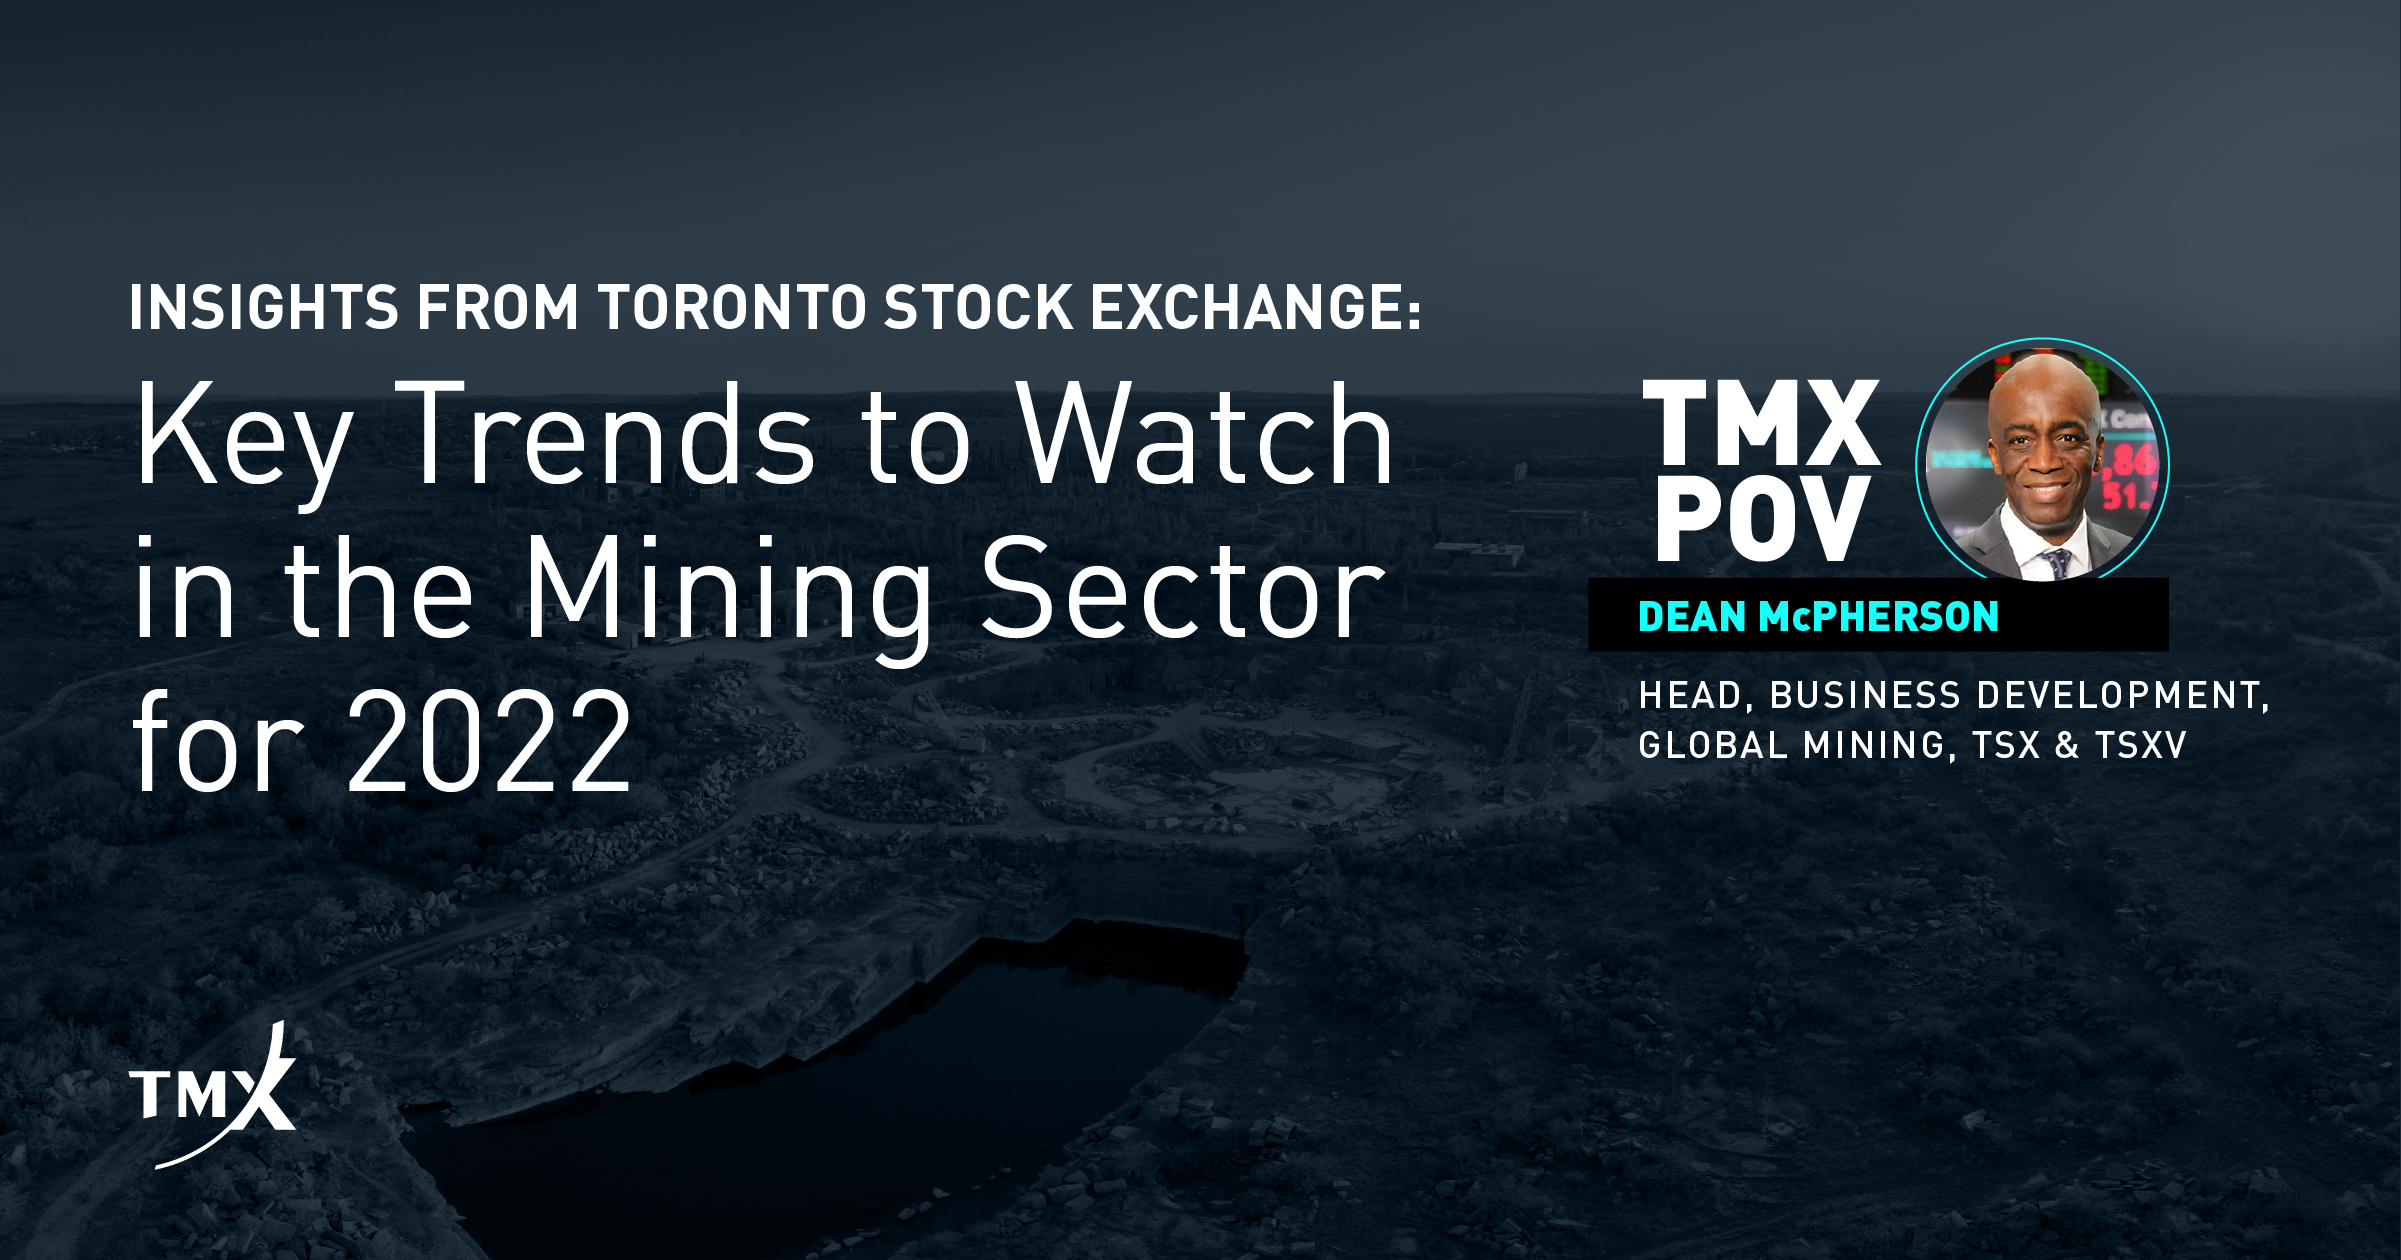 Key Trends to Watch in the Mining Sector for 2022: Insights from Toronto Stock Exchange